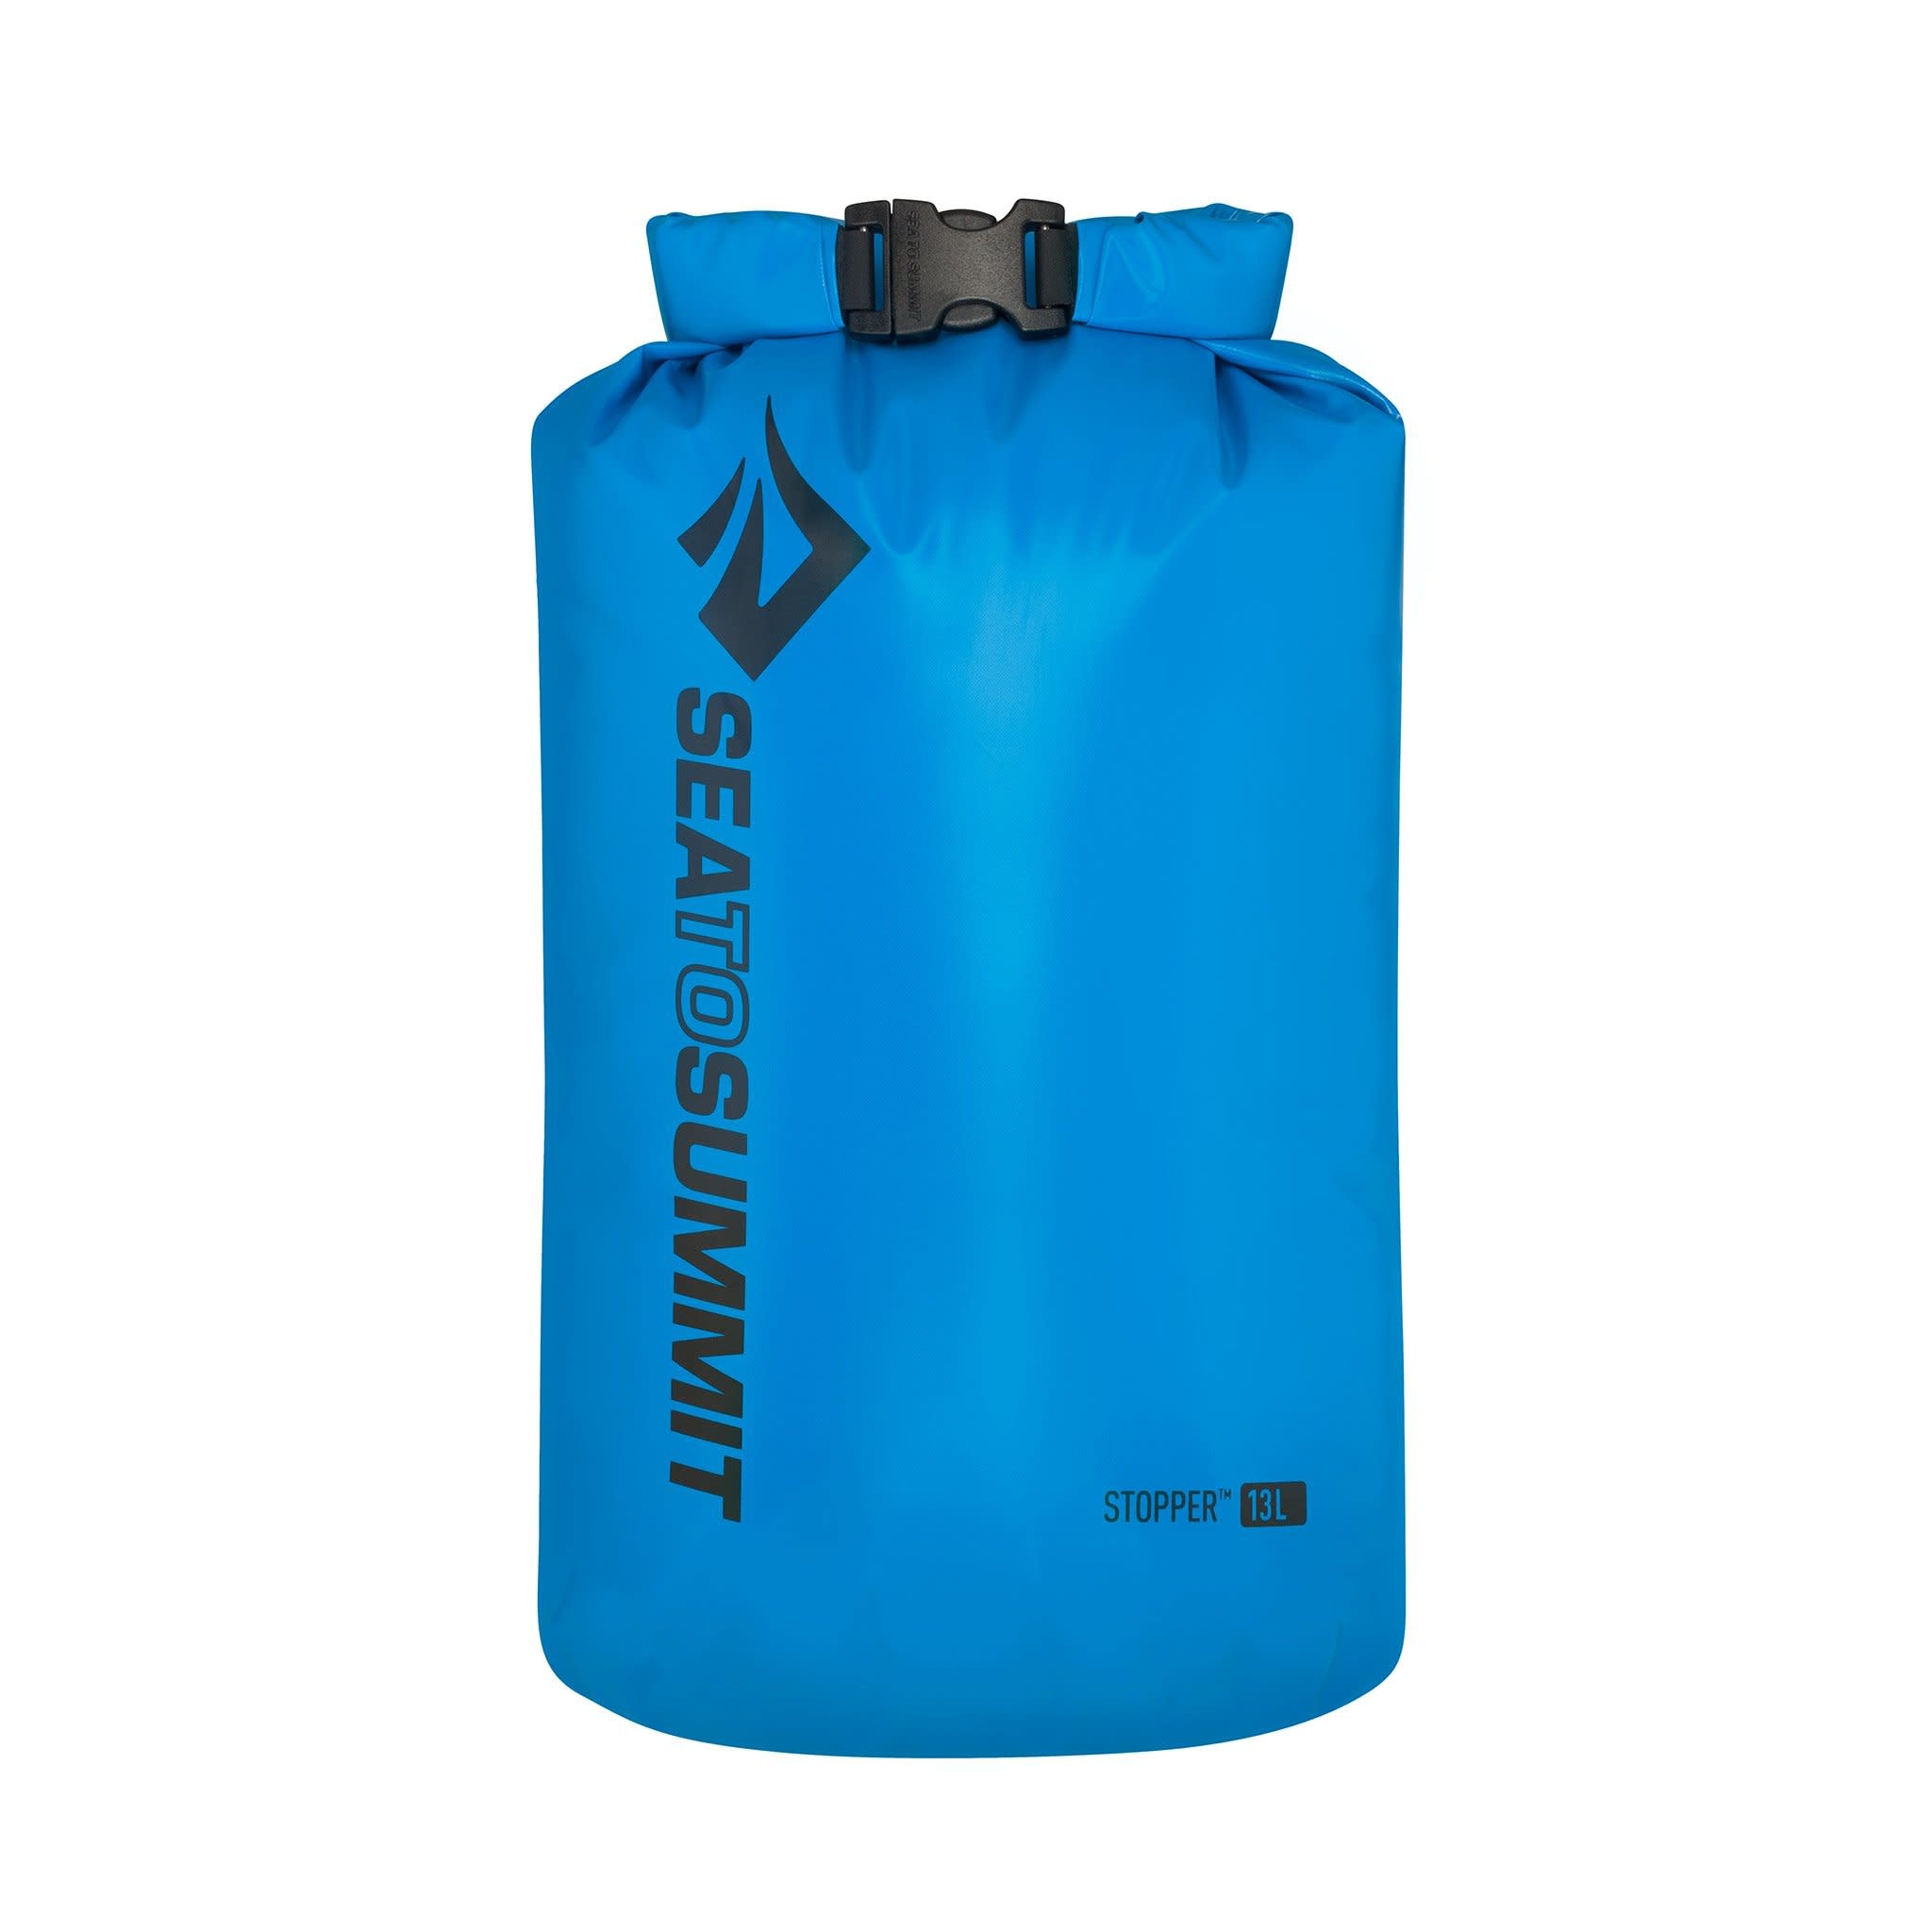 Sea to Summit Sea to Summit 13L STOPPER DRY BAG